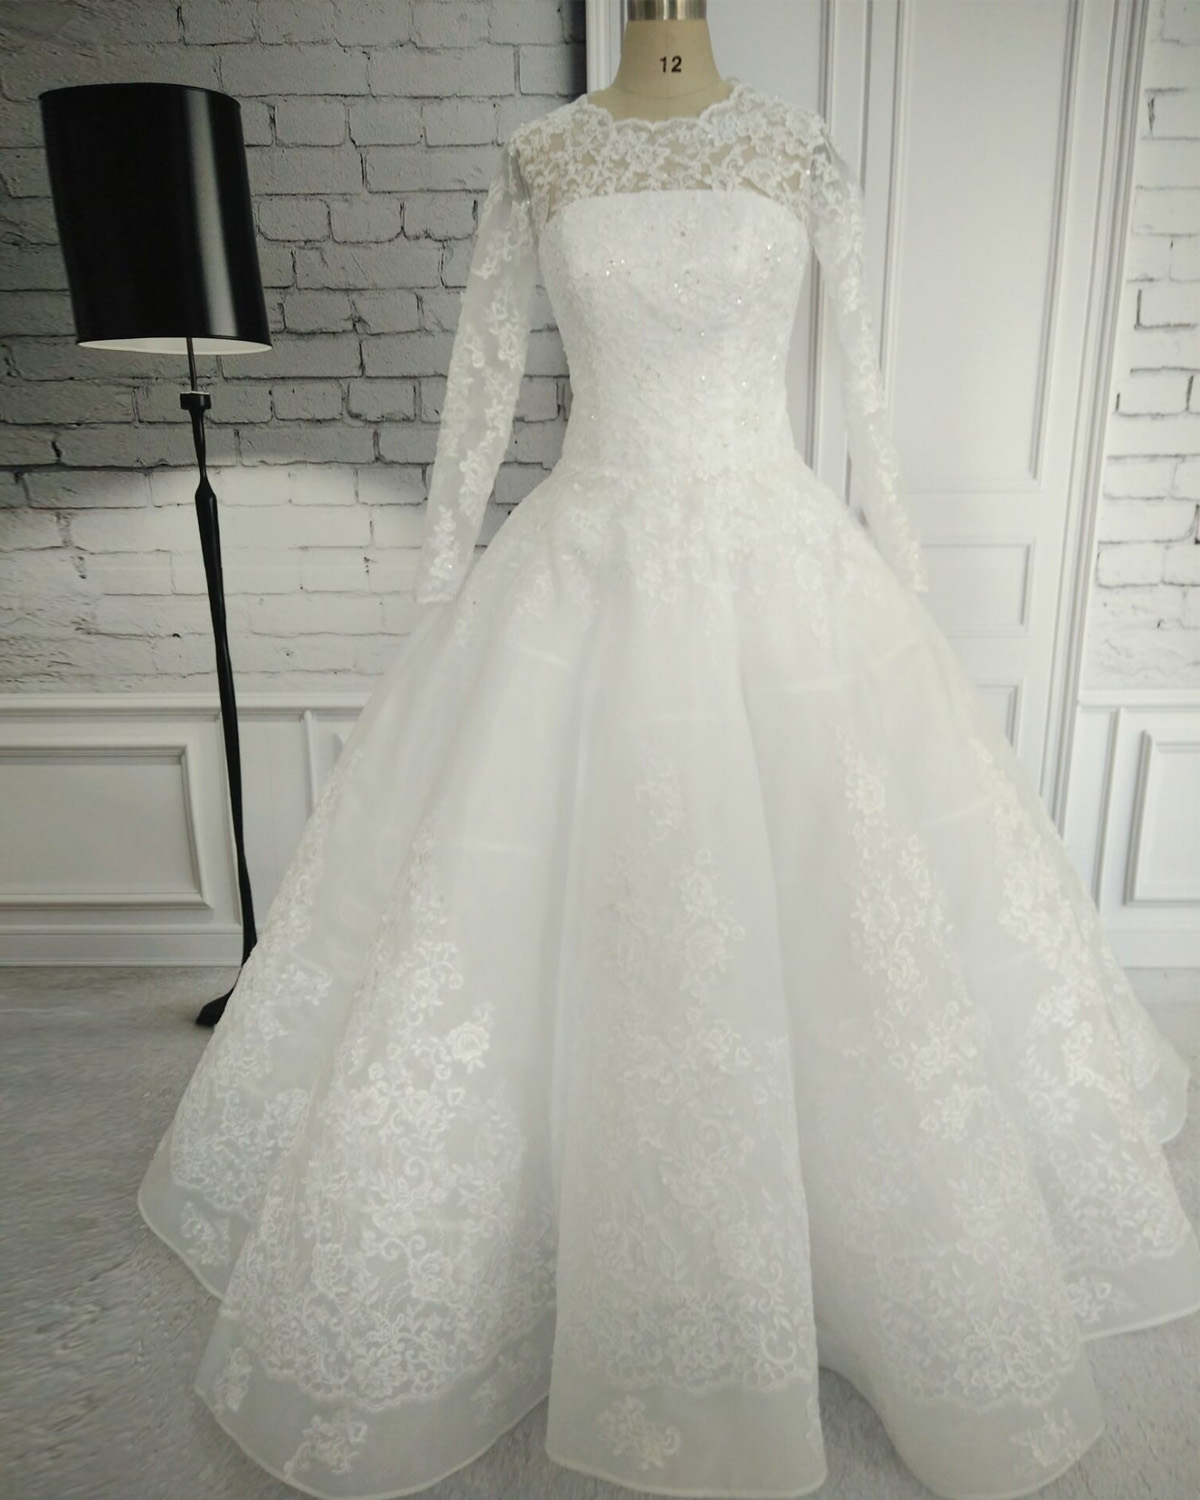 Custom Made White Ball Gown Long Sleeve Wedding Dresses 2017 Floor Length Lace Bridal Gown